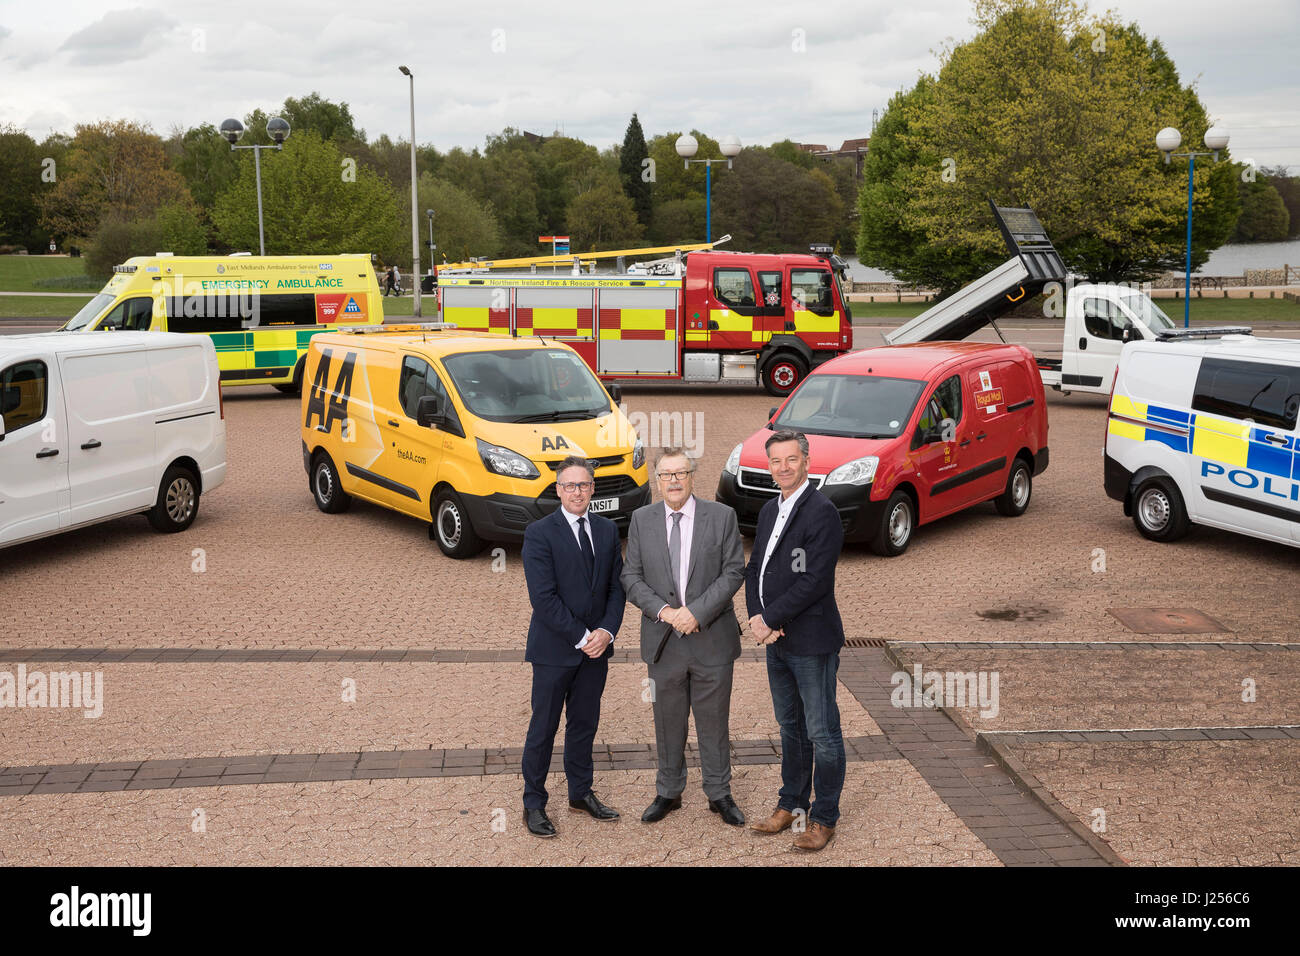 (Left to right) Richard Burnett (Road Haulage Association Chief Executive), Ian Chisholm (SOE, Society of Operations Engineers) and Mike Hawes (CEO of Society of Motor Manufacturers and Traders) pose in front of seven Euro VI emergency response, service and delivery vehicles on display at the 2017 Commercial Vehicle Show at the Birmingham NEC. Front row (left to right): Vauxhall Vivaro, AA Ford Transit, Peugeot Royal Mail Partner Van and Ford Transit Police Van. Back row (left to right): Fiat Ducato Ambulance, Volvo Fire Tender FL Truck and Citroen 'Relay Ready to Run' Tipper. Stock Photo